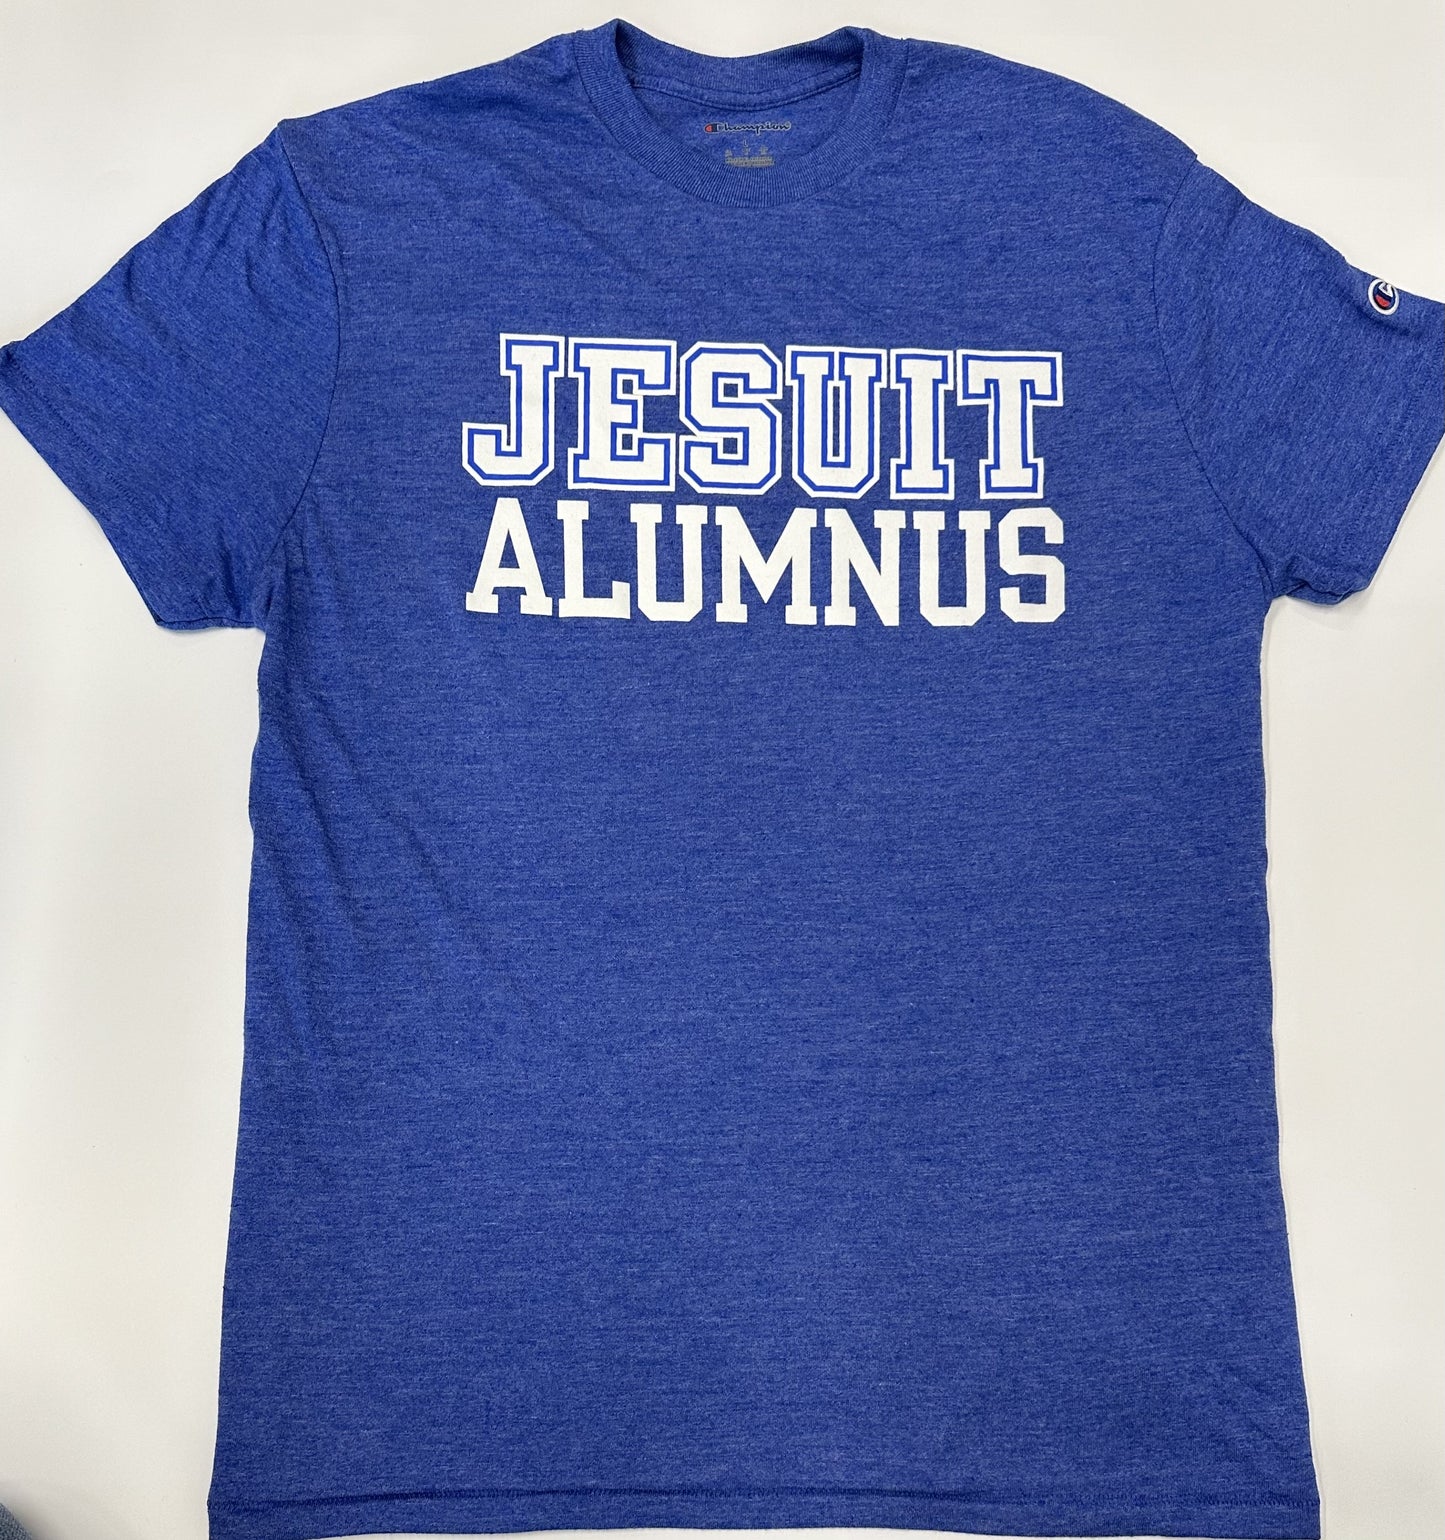 Champion. 50% Polyester/37% Cotton/13% Rayon Jersey. 1 x 1 rib at collar. Set in short sleeve with slightly shorter, more modern fit. Jesuit Alumnus logo.